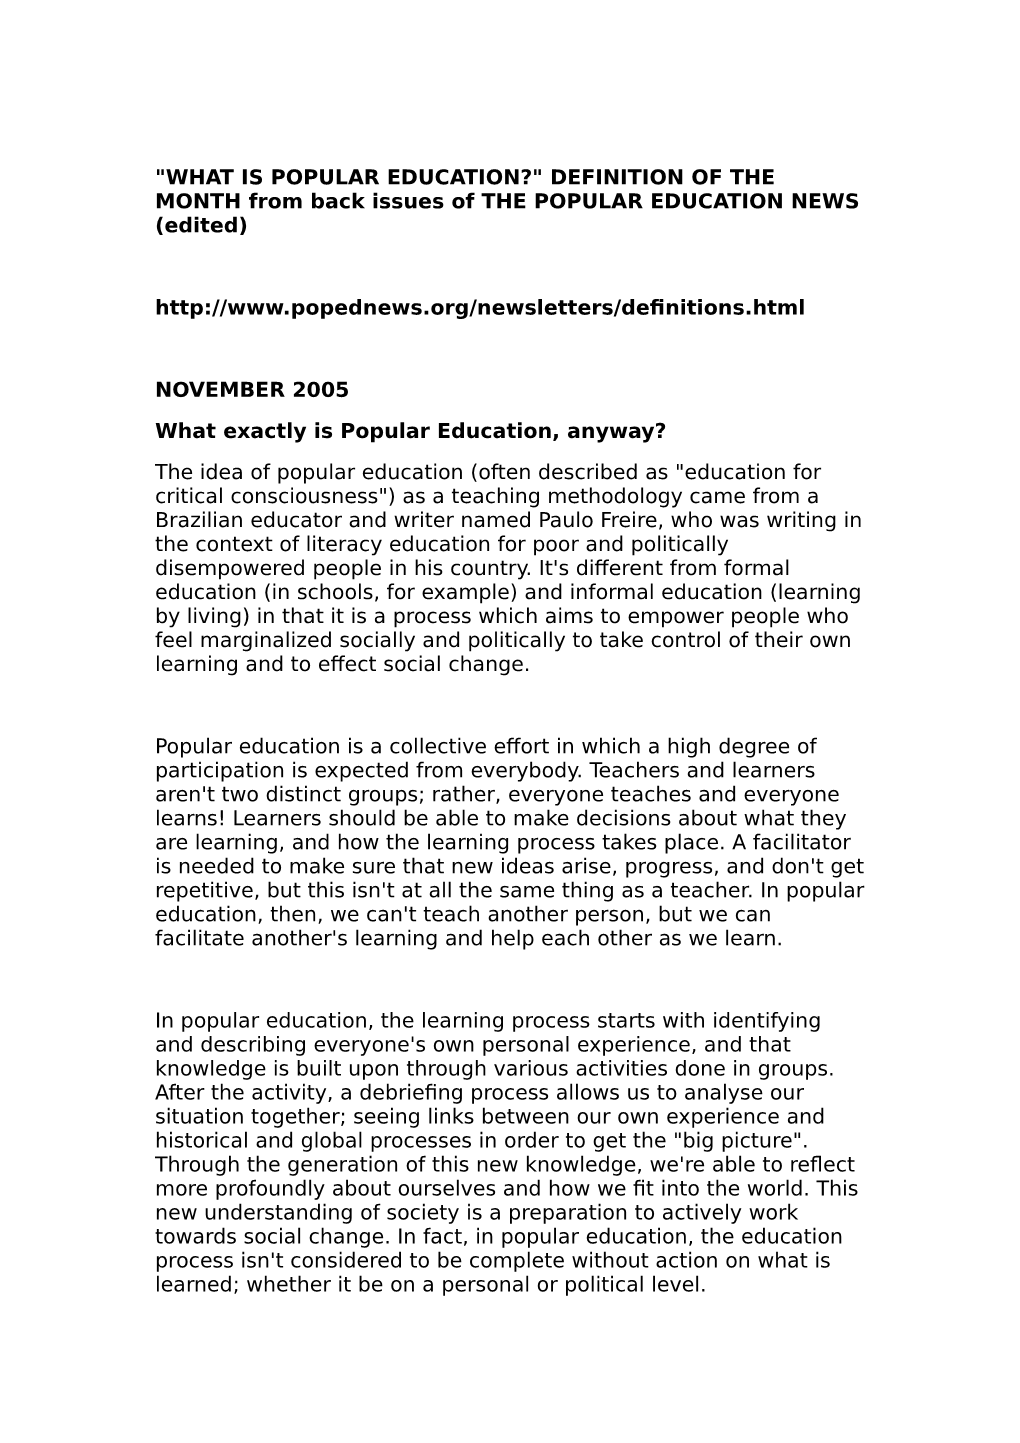 "WHAT IS POPULAR EDUCATION?" DEFINITION of the MONTH from Back Issues of the POPULAR EDUCATION NEWS (Edited)